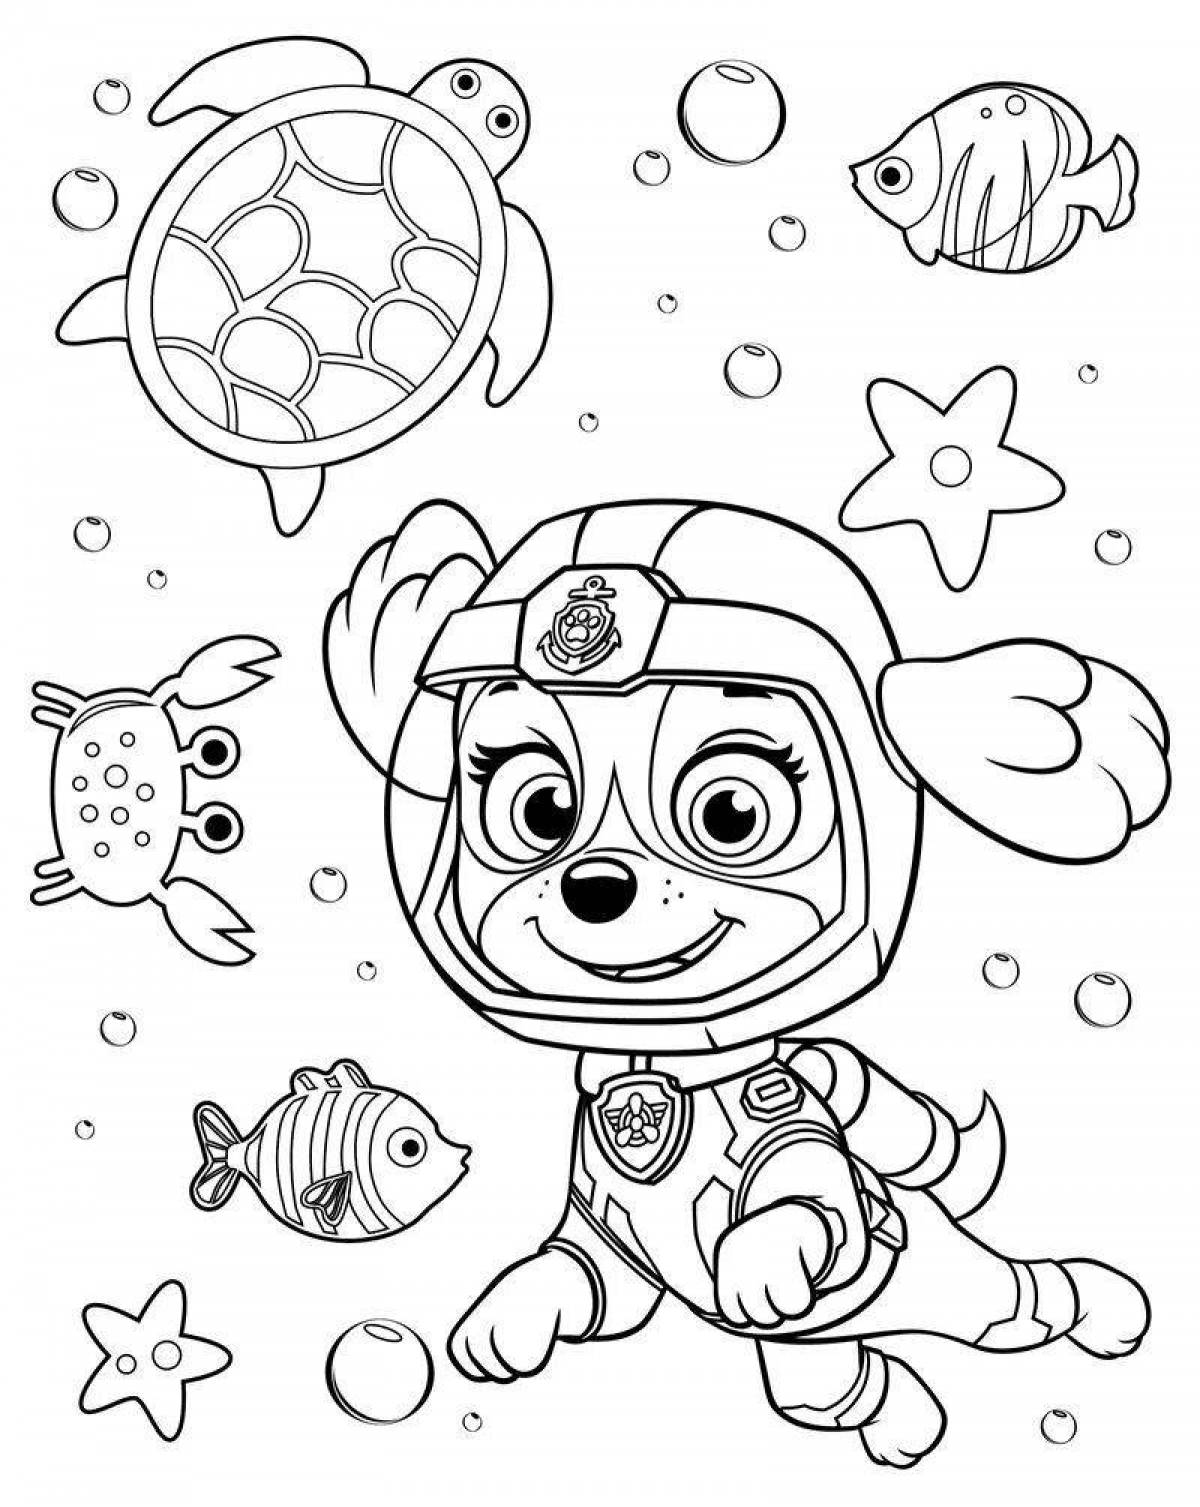 Great paw patrol coloring page